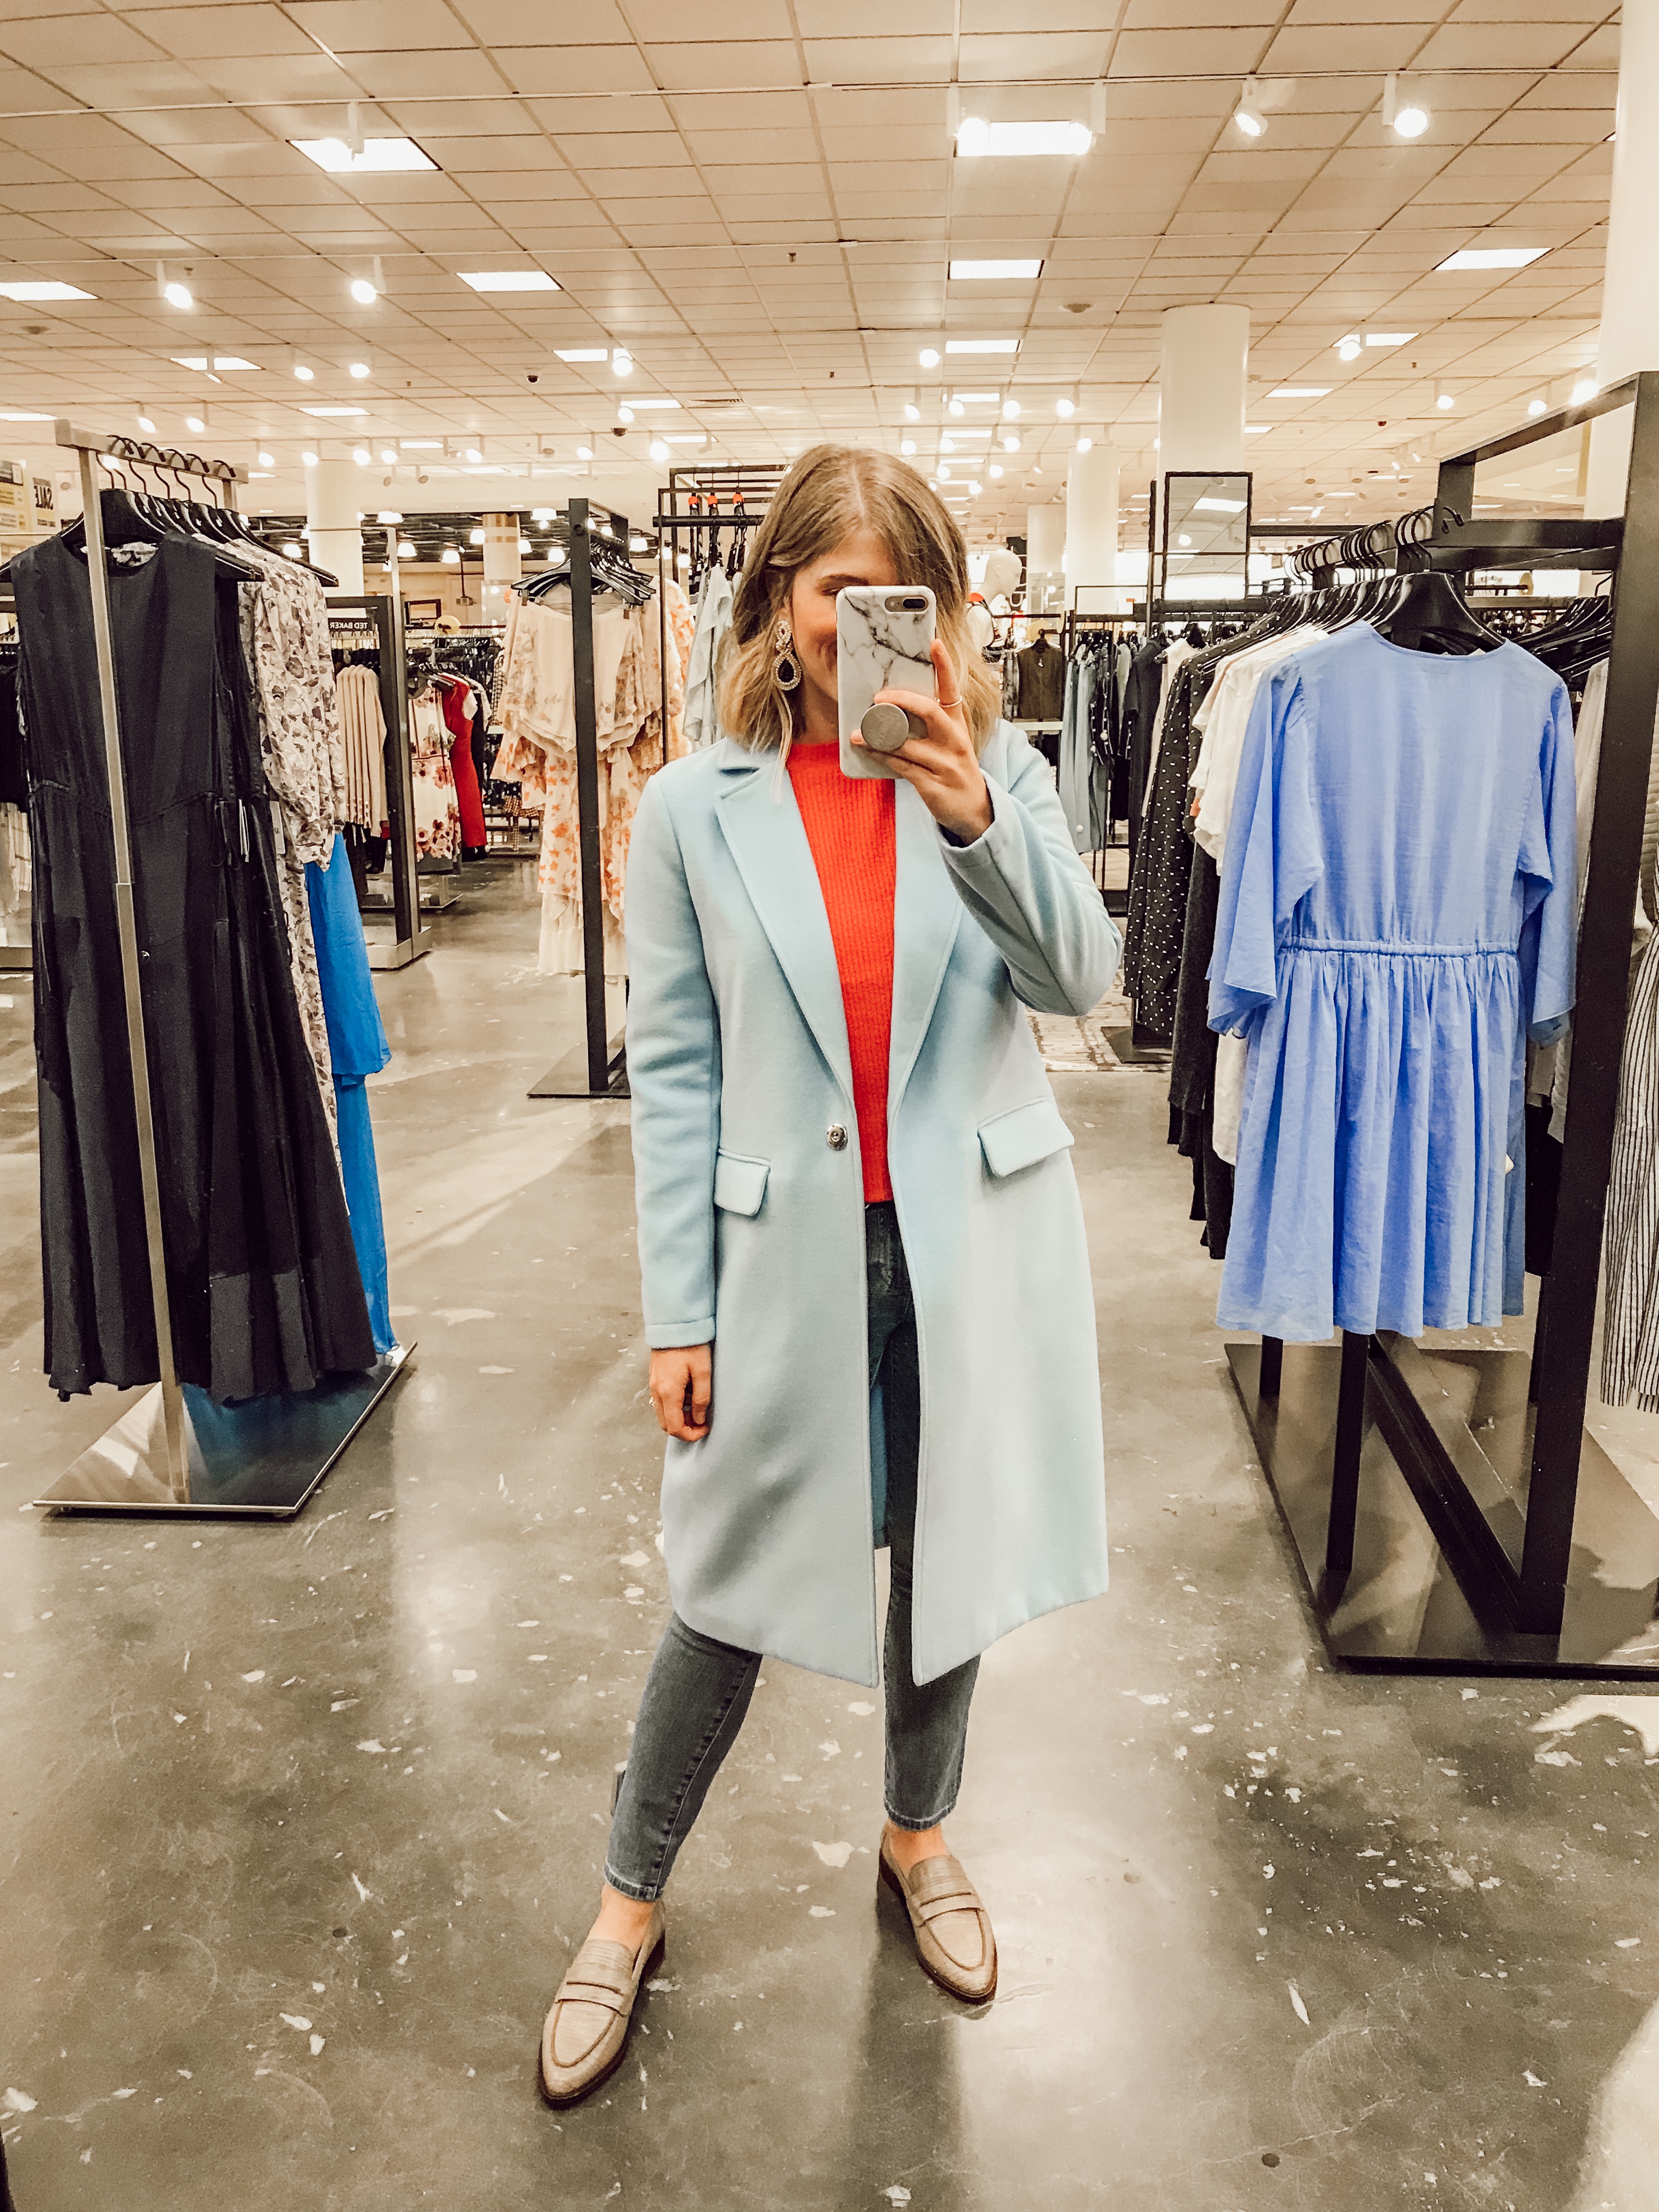 Vince Camuto Lightweight Long Coat | 2019 Nordstrom Anniversary Fitting Room Session featured on Louella Reese Life & Style Blog